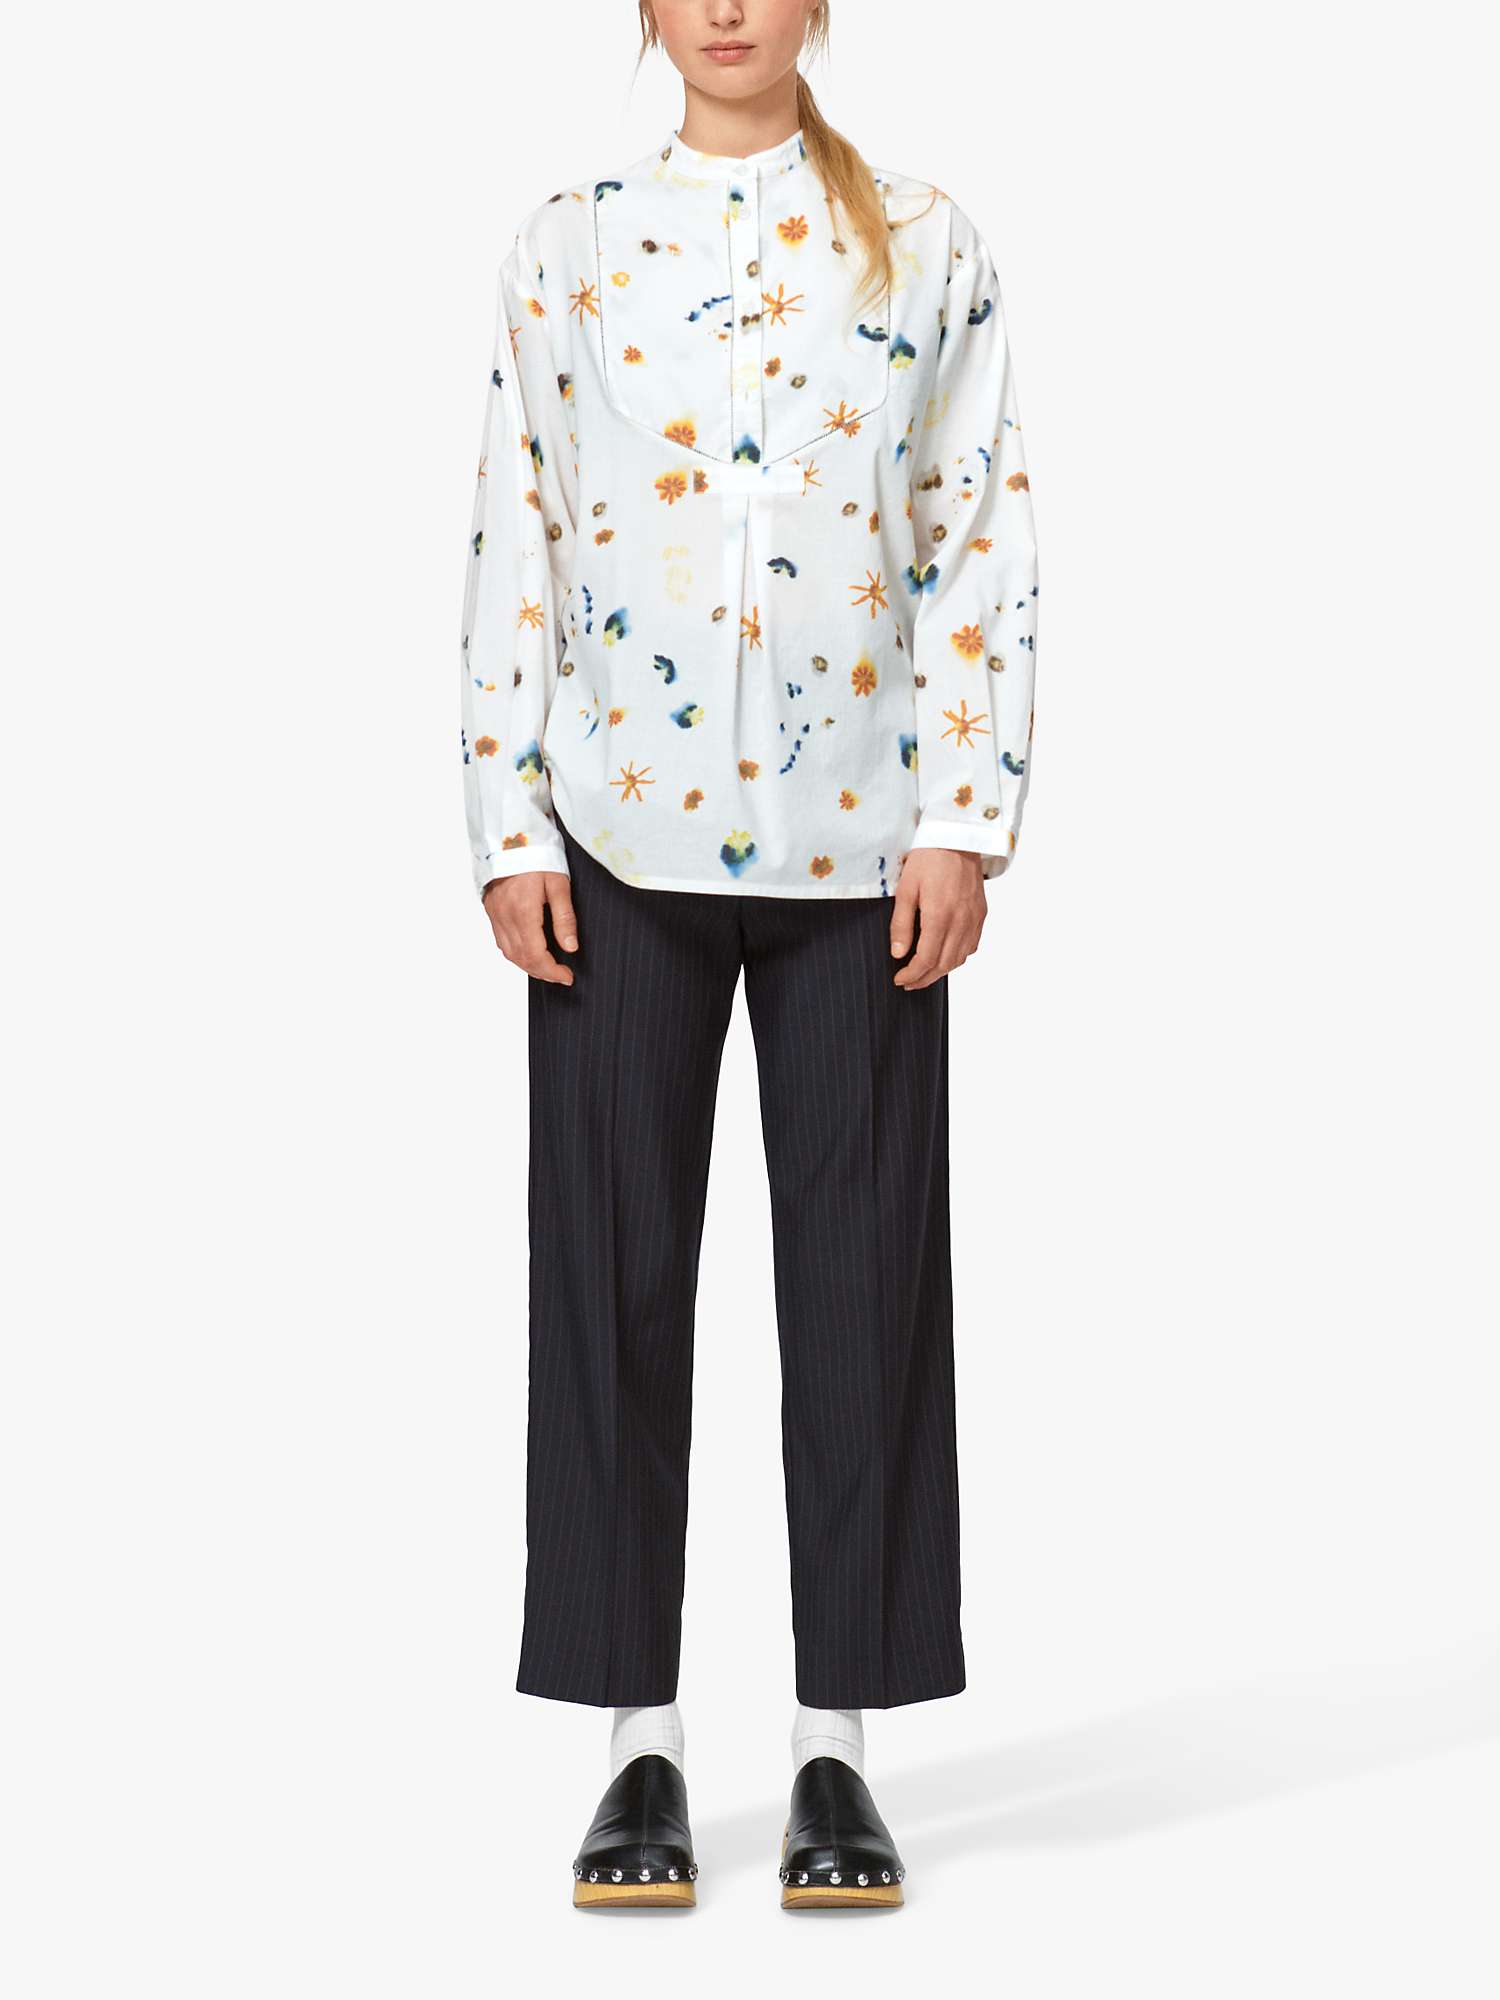 Buy nué notes Roy Cotton Long Sleeved Shirt, Yellow Cream Online at johnlewis.com